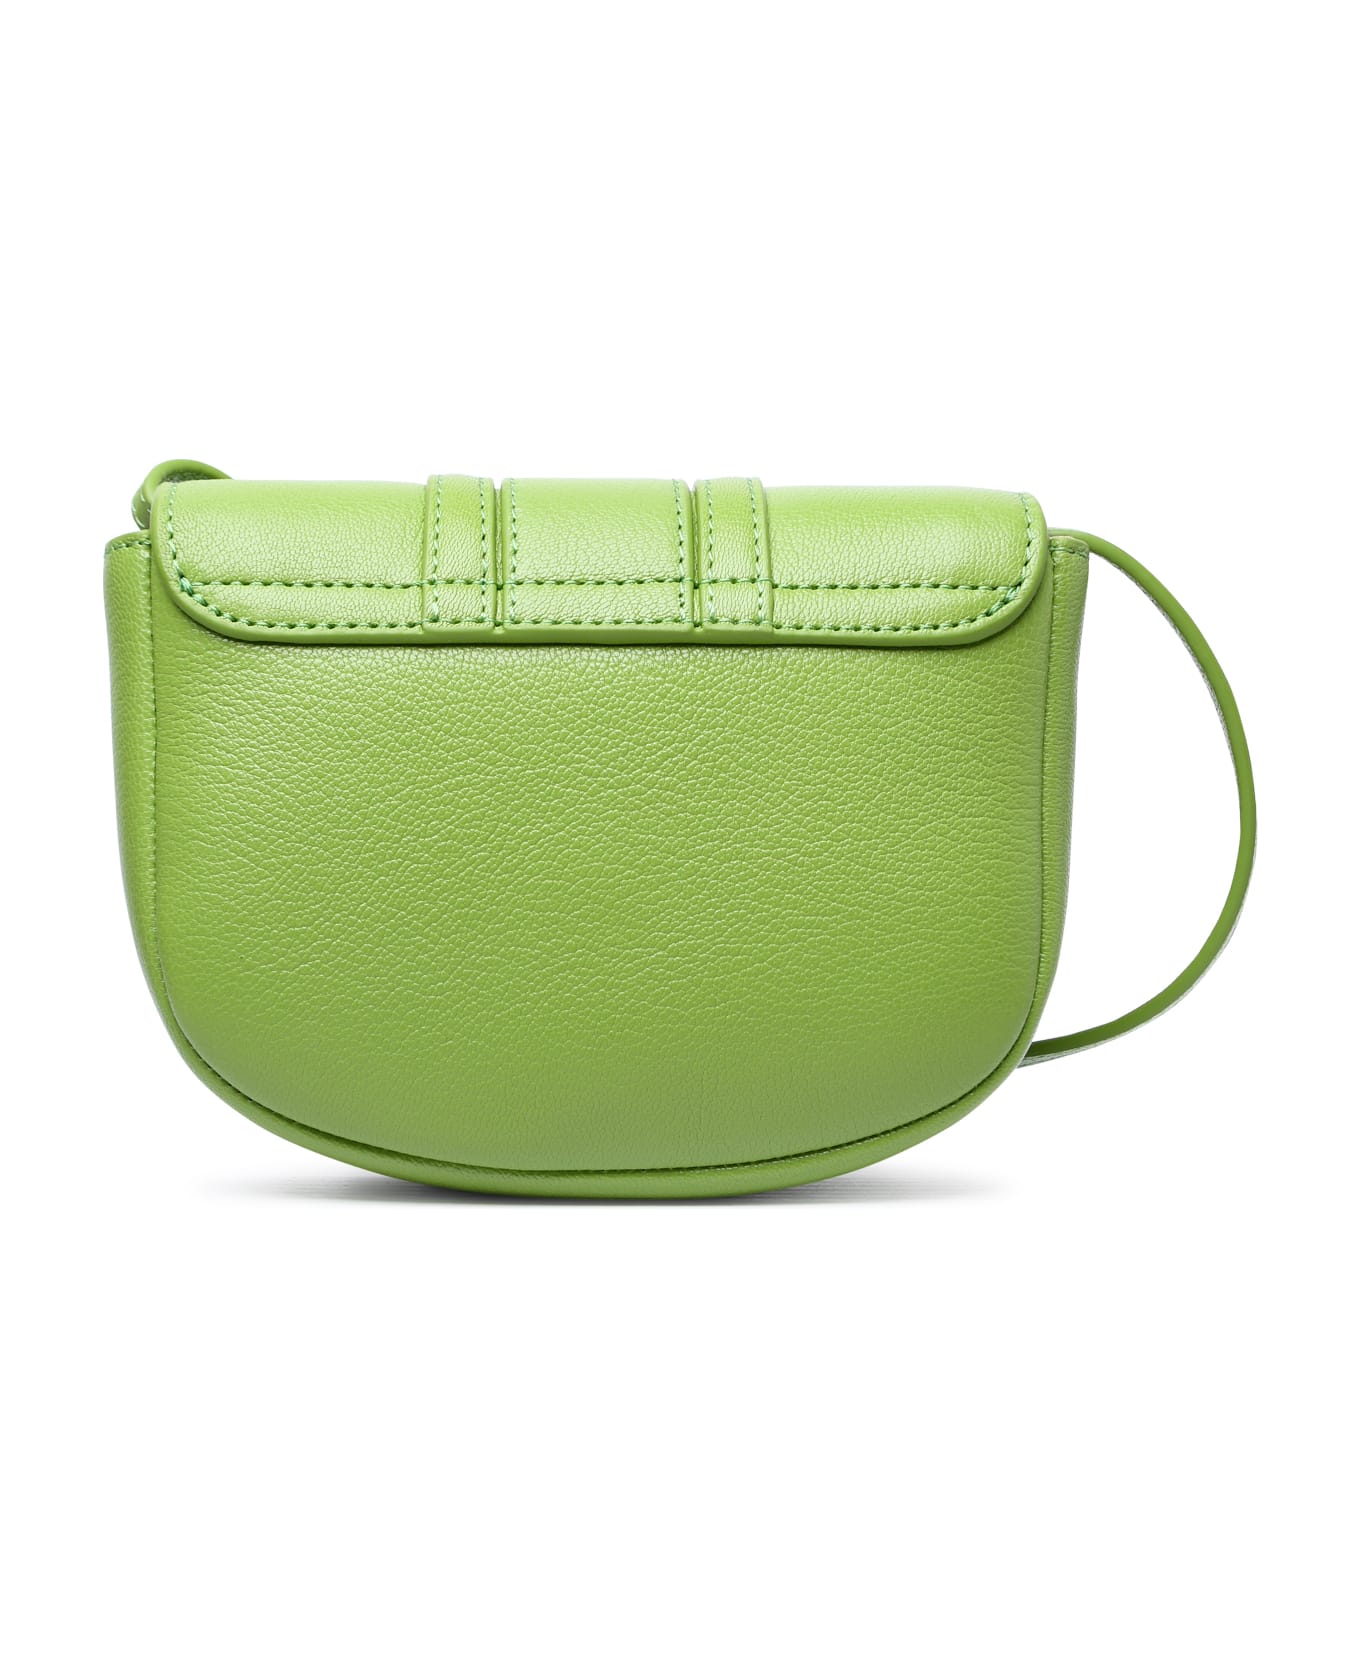 See by Chloé 'hana' Small Green Leather Bag - Green